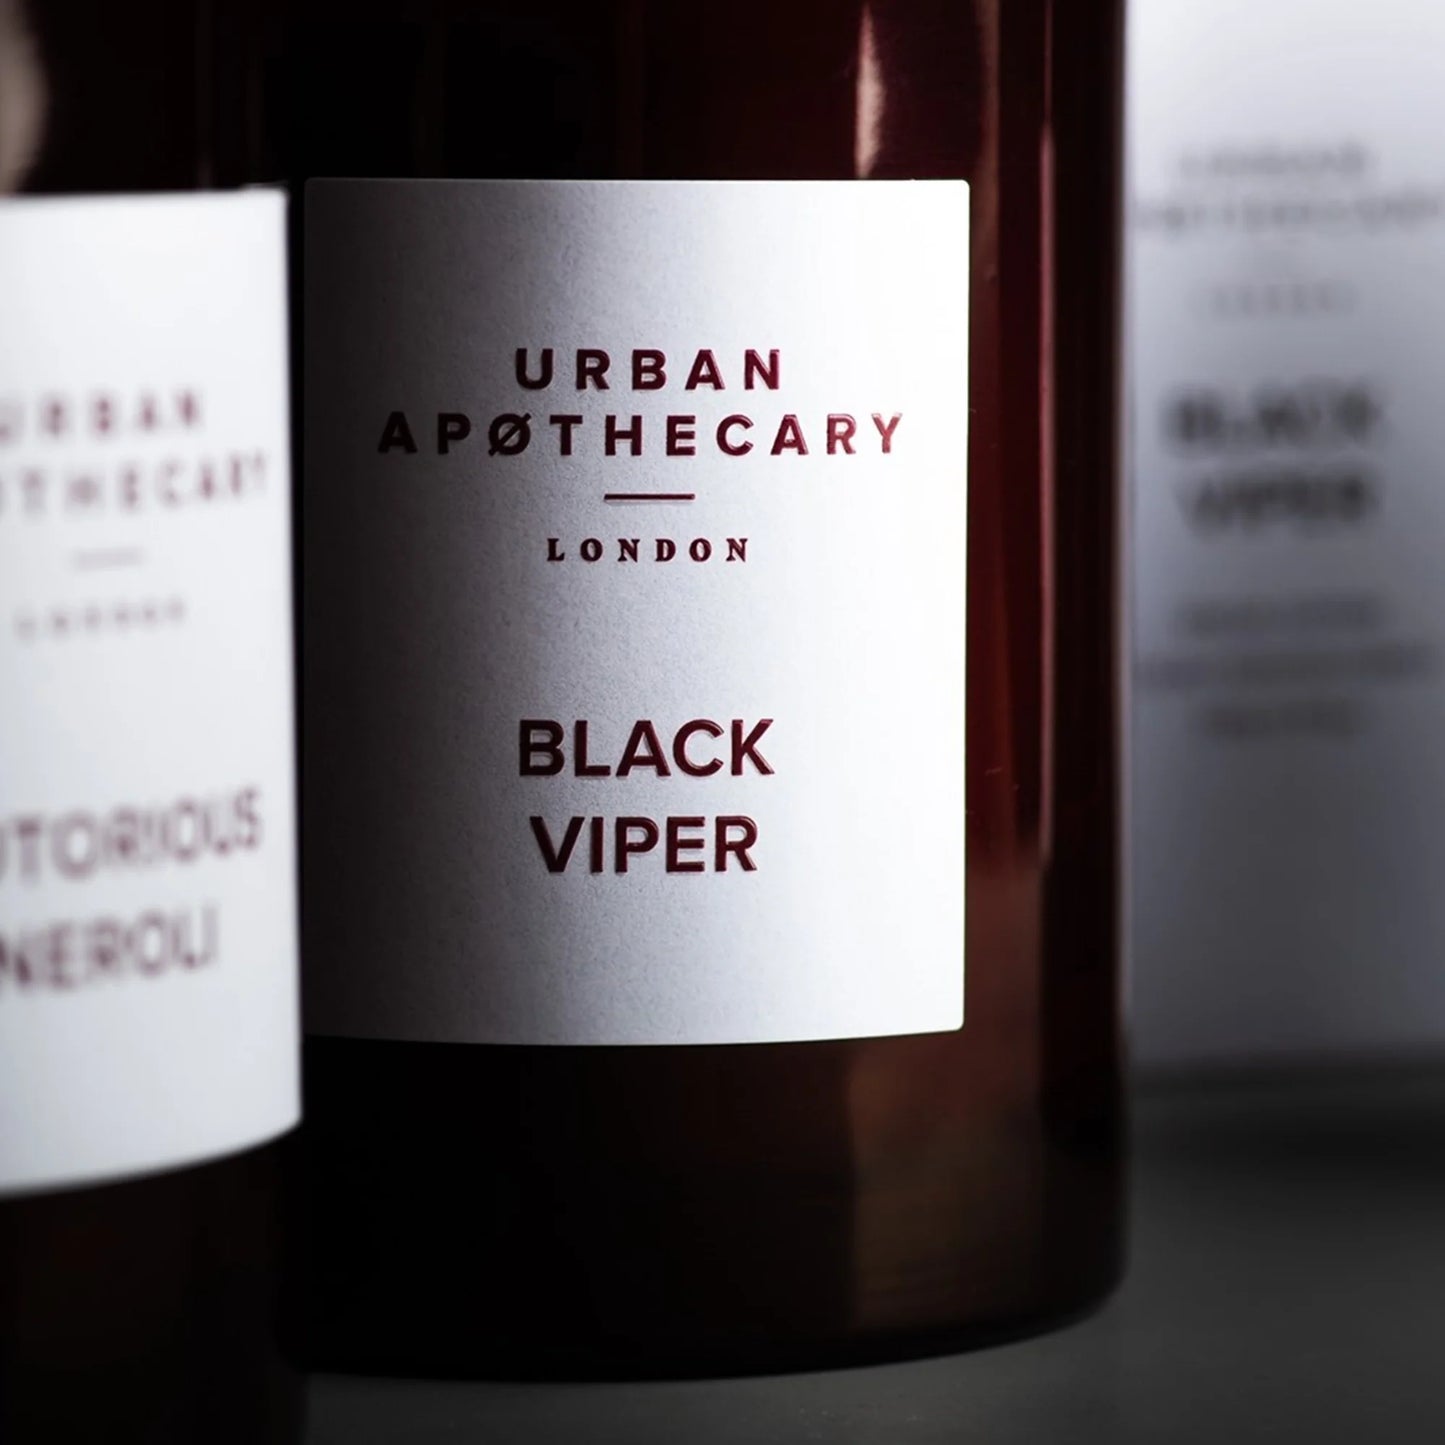 Ruby Collection Candle-Urban Apothecary